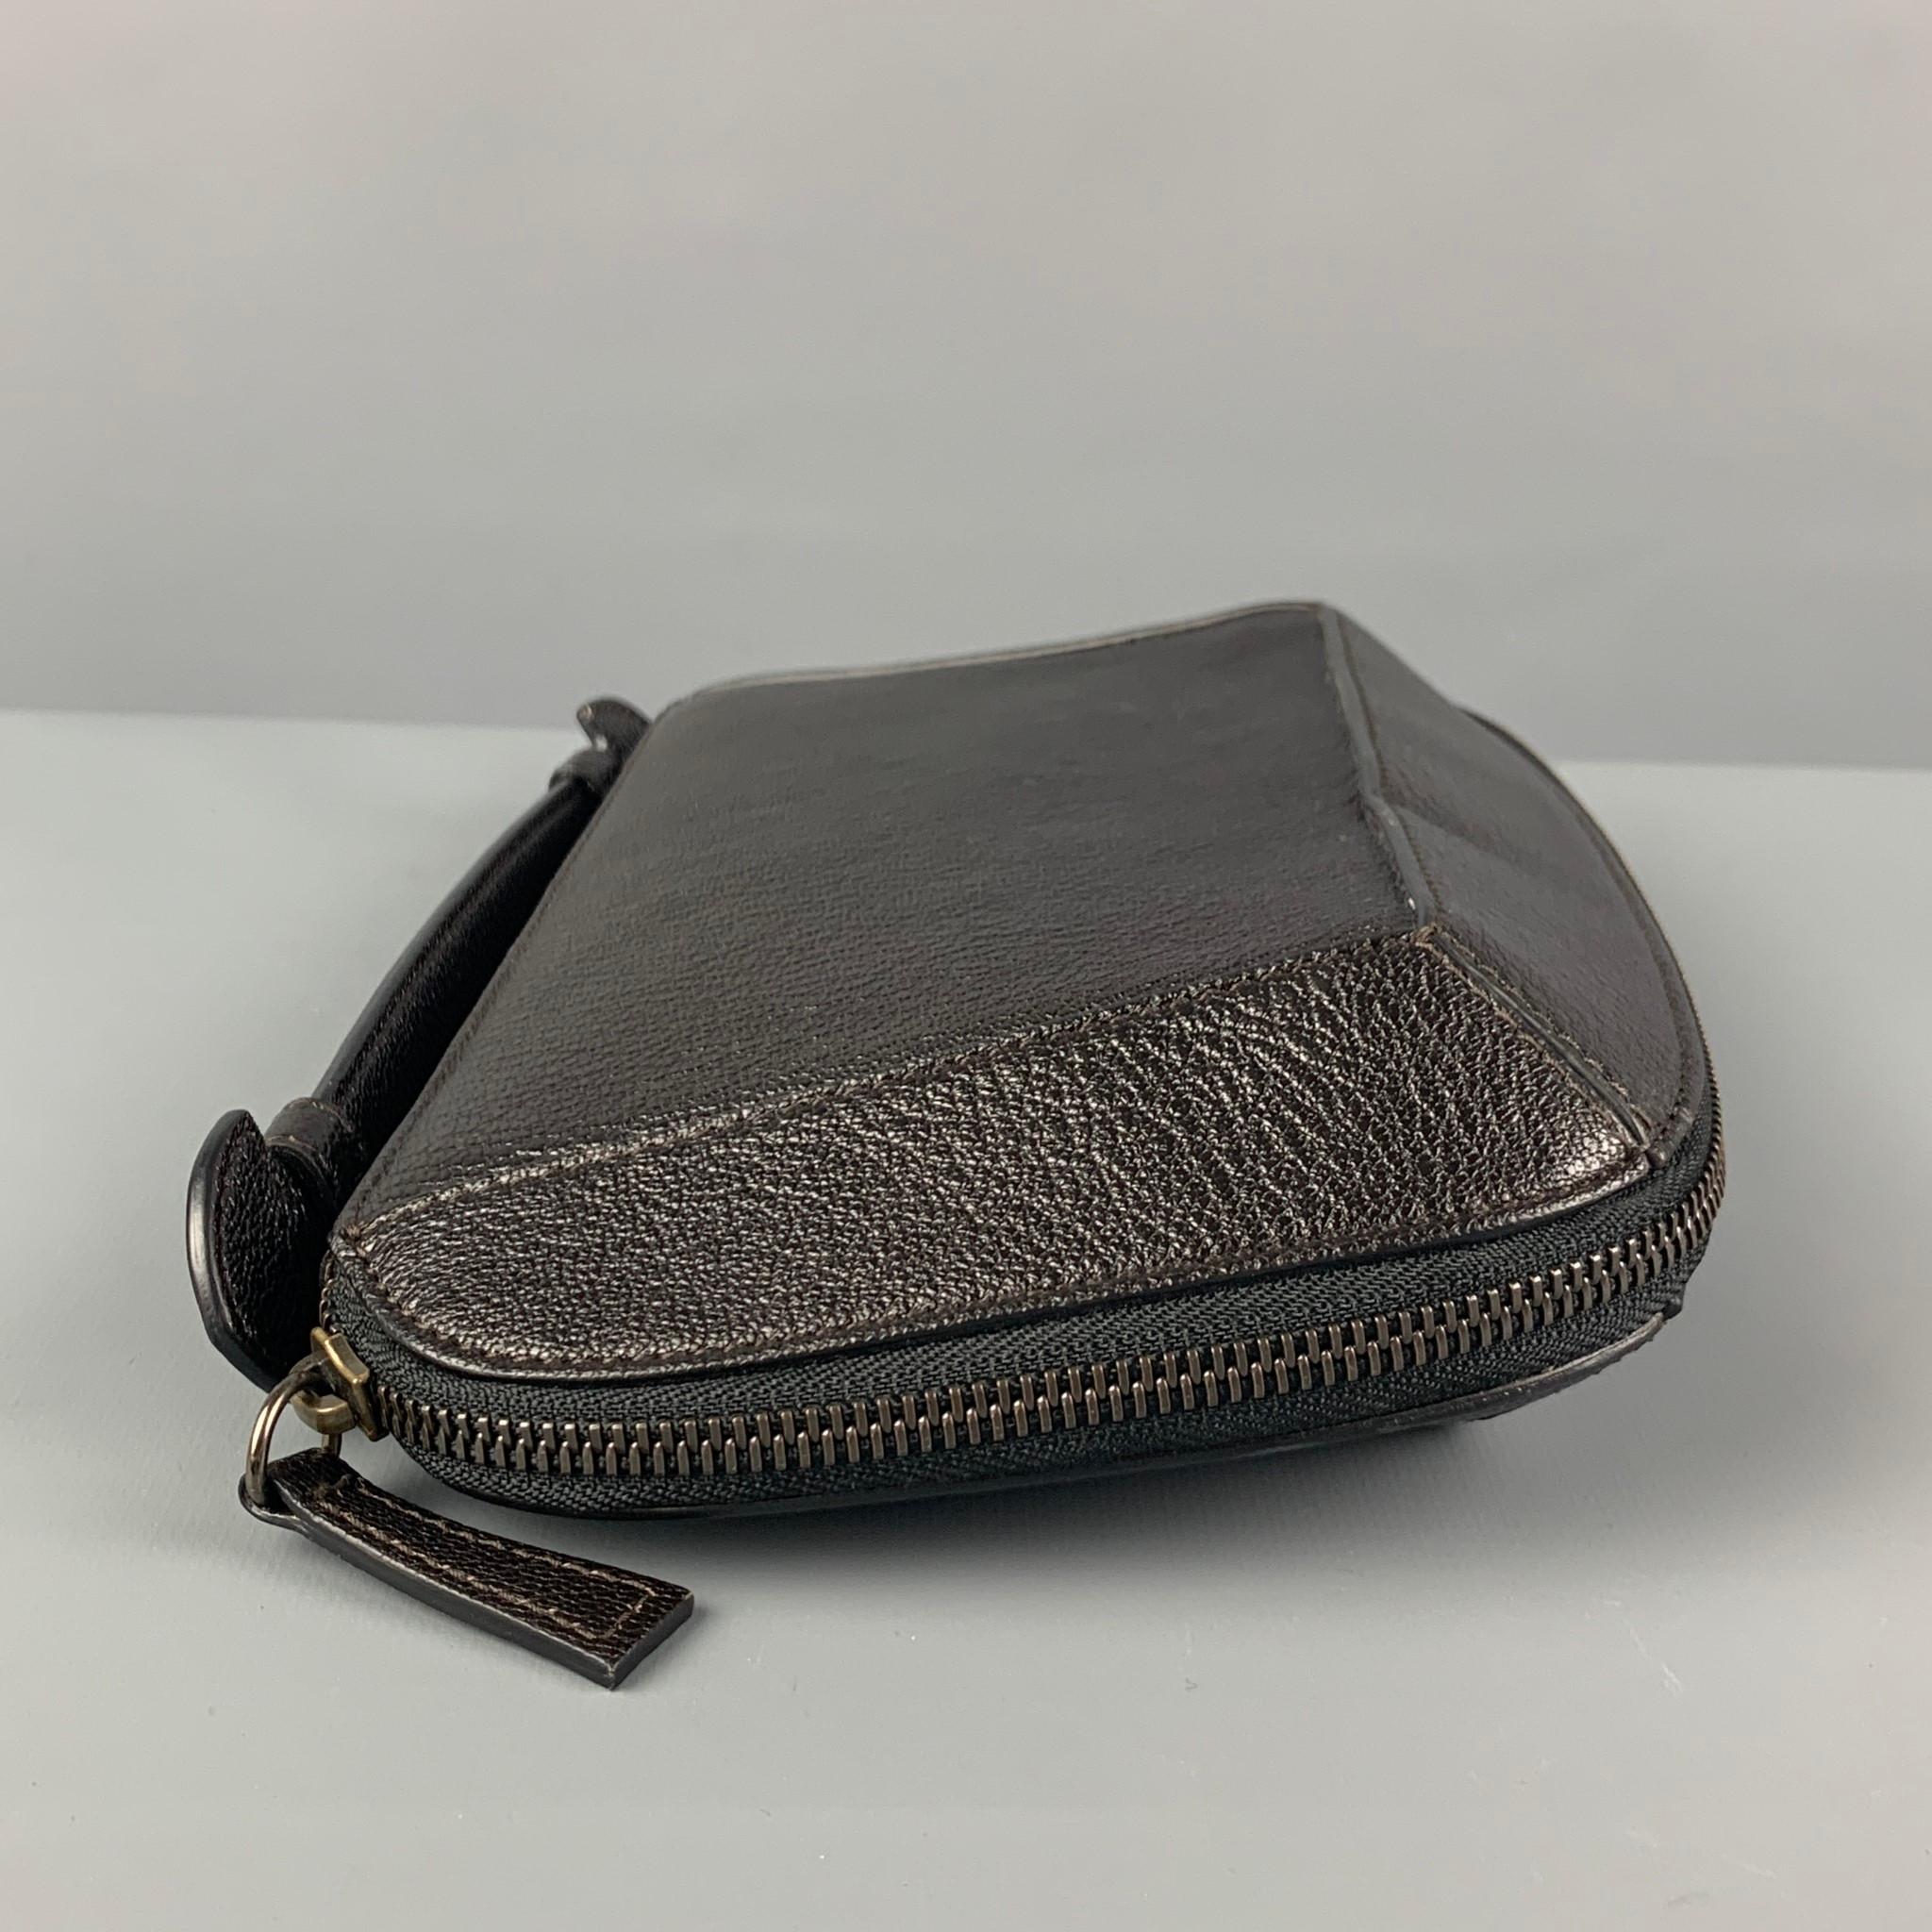 HOLLY CARDWELL clutch comes in a black leather featuring a red interior, top handles, inner slots, and a zipper closure. Made in Italy. 

Very Good Pre-Owned Condition.

Measurements:

Length: 10 in.
Width: 3 in.
Height: 4.5 in.
 